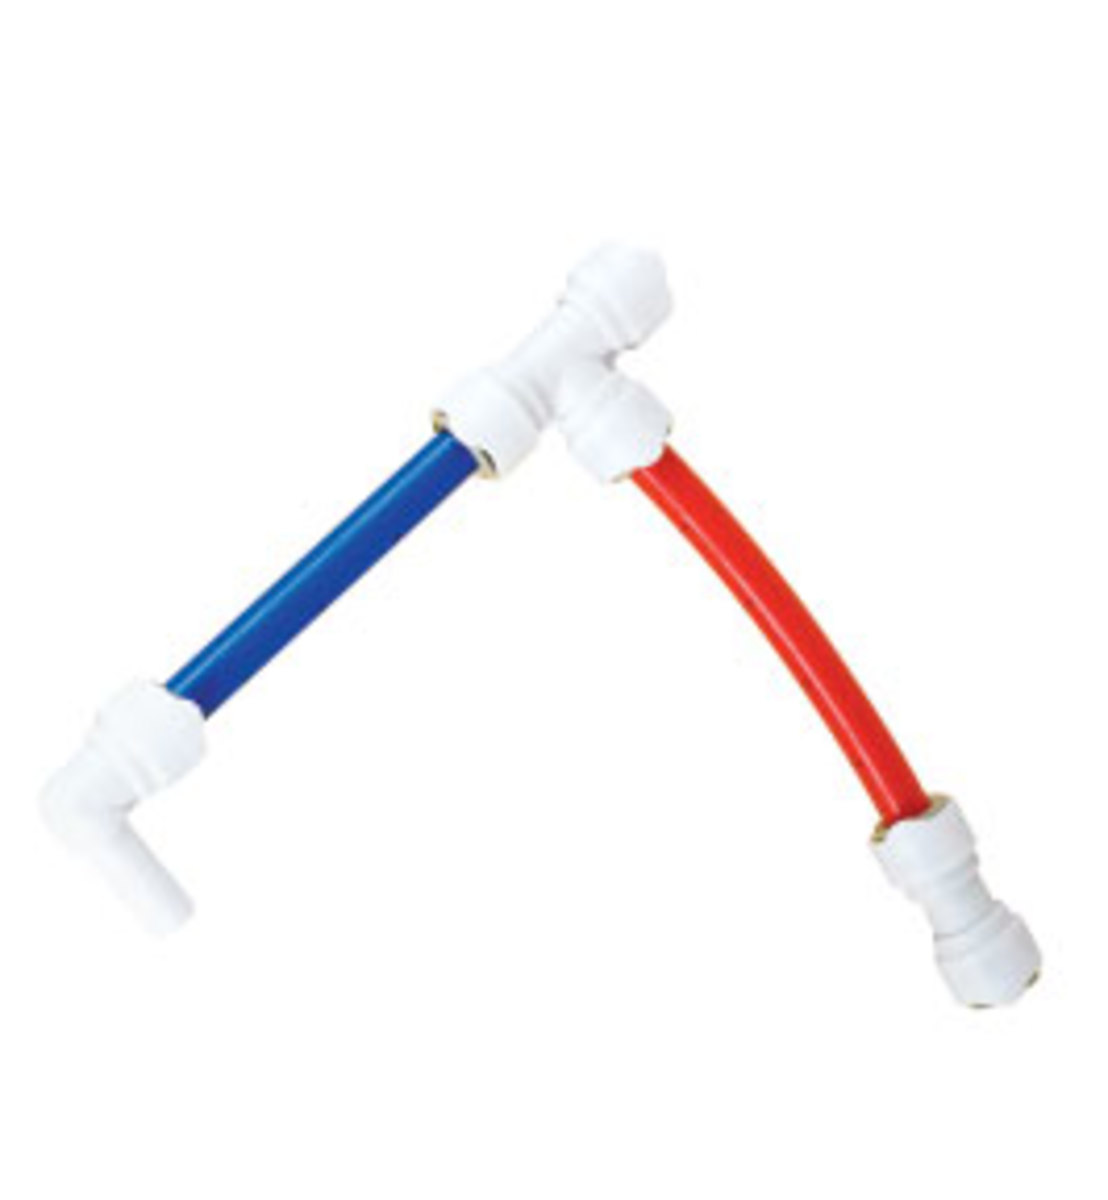 Push-fit connectors, like those from Whale or SeaTech, are a snap to install and can be re-used